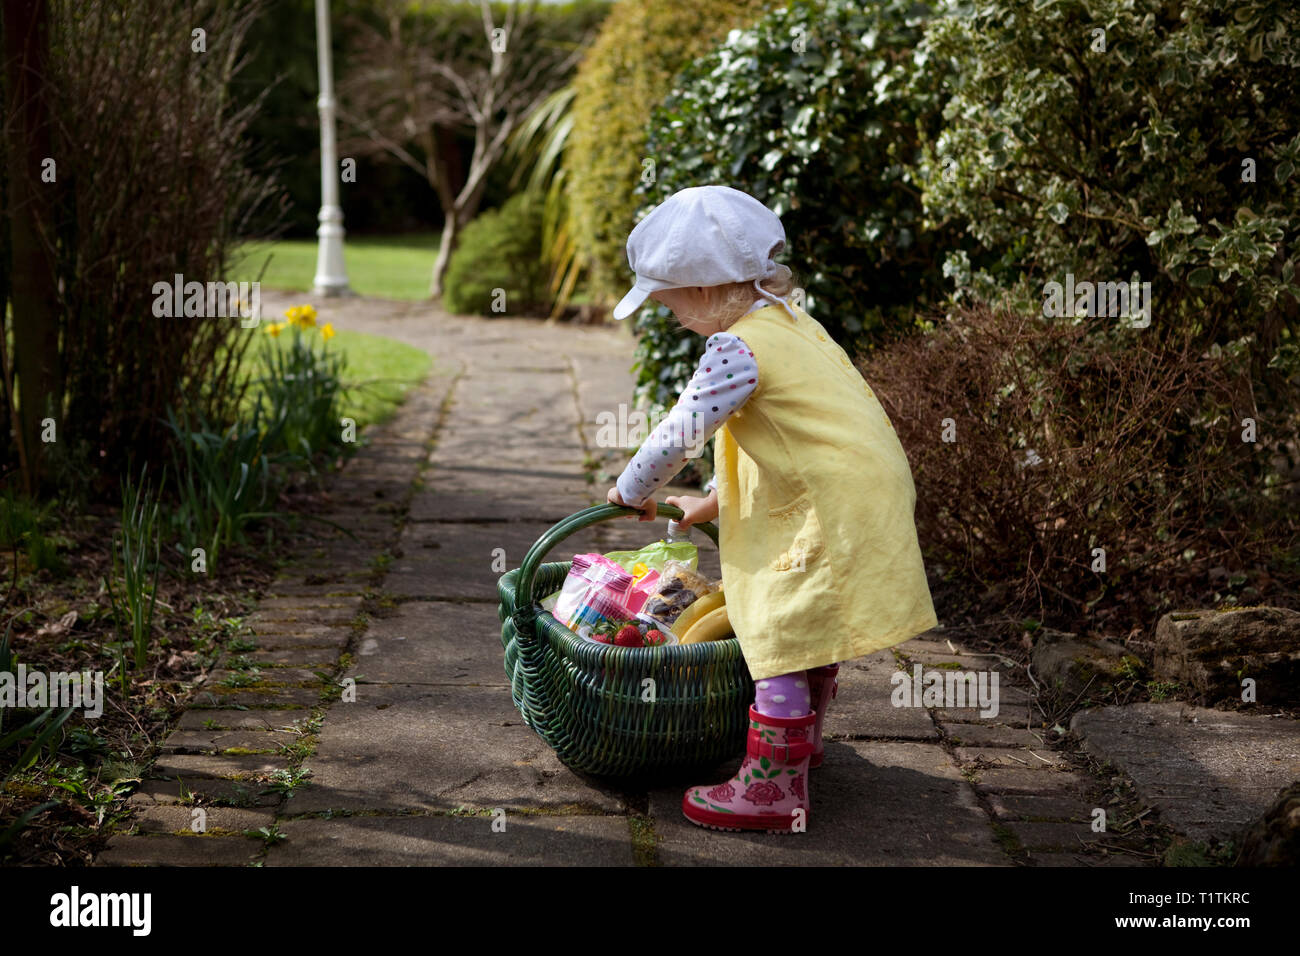 Toddler carrying a green wicker basket full of groceries Stock Photo